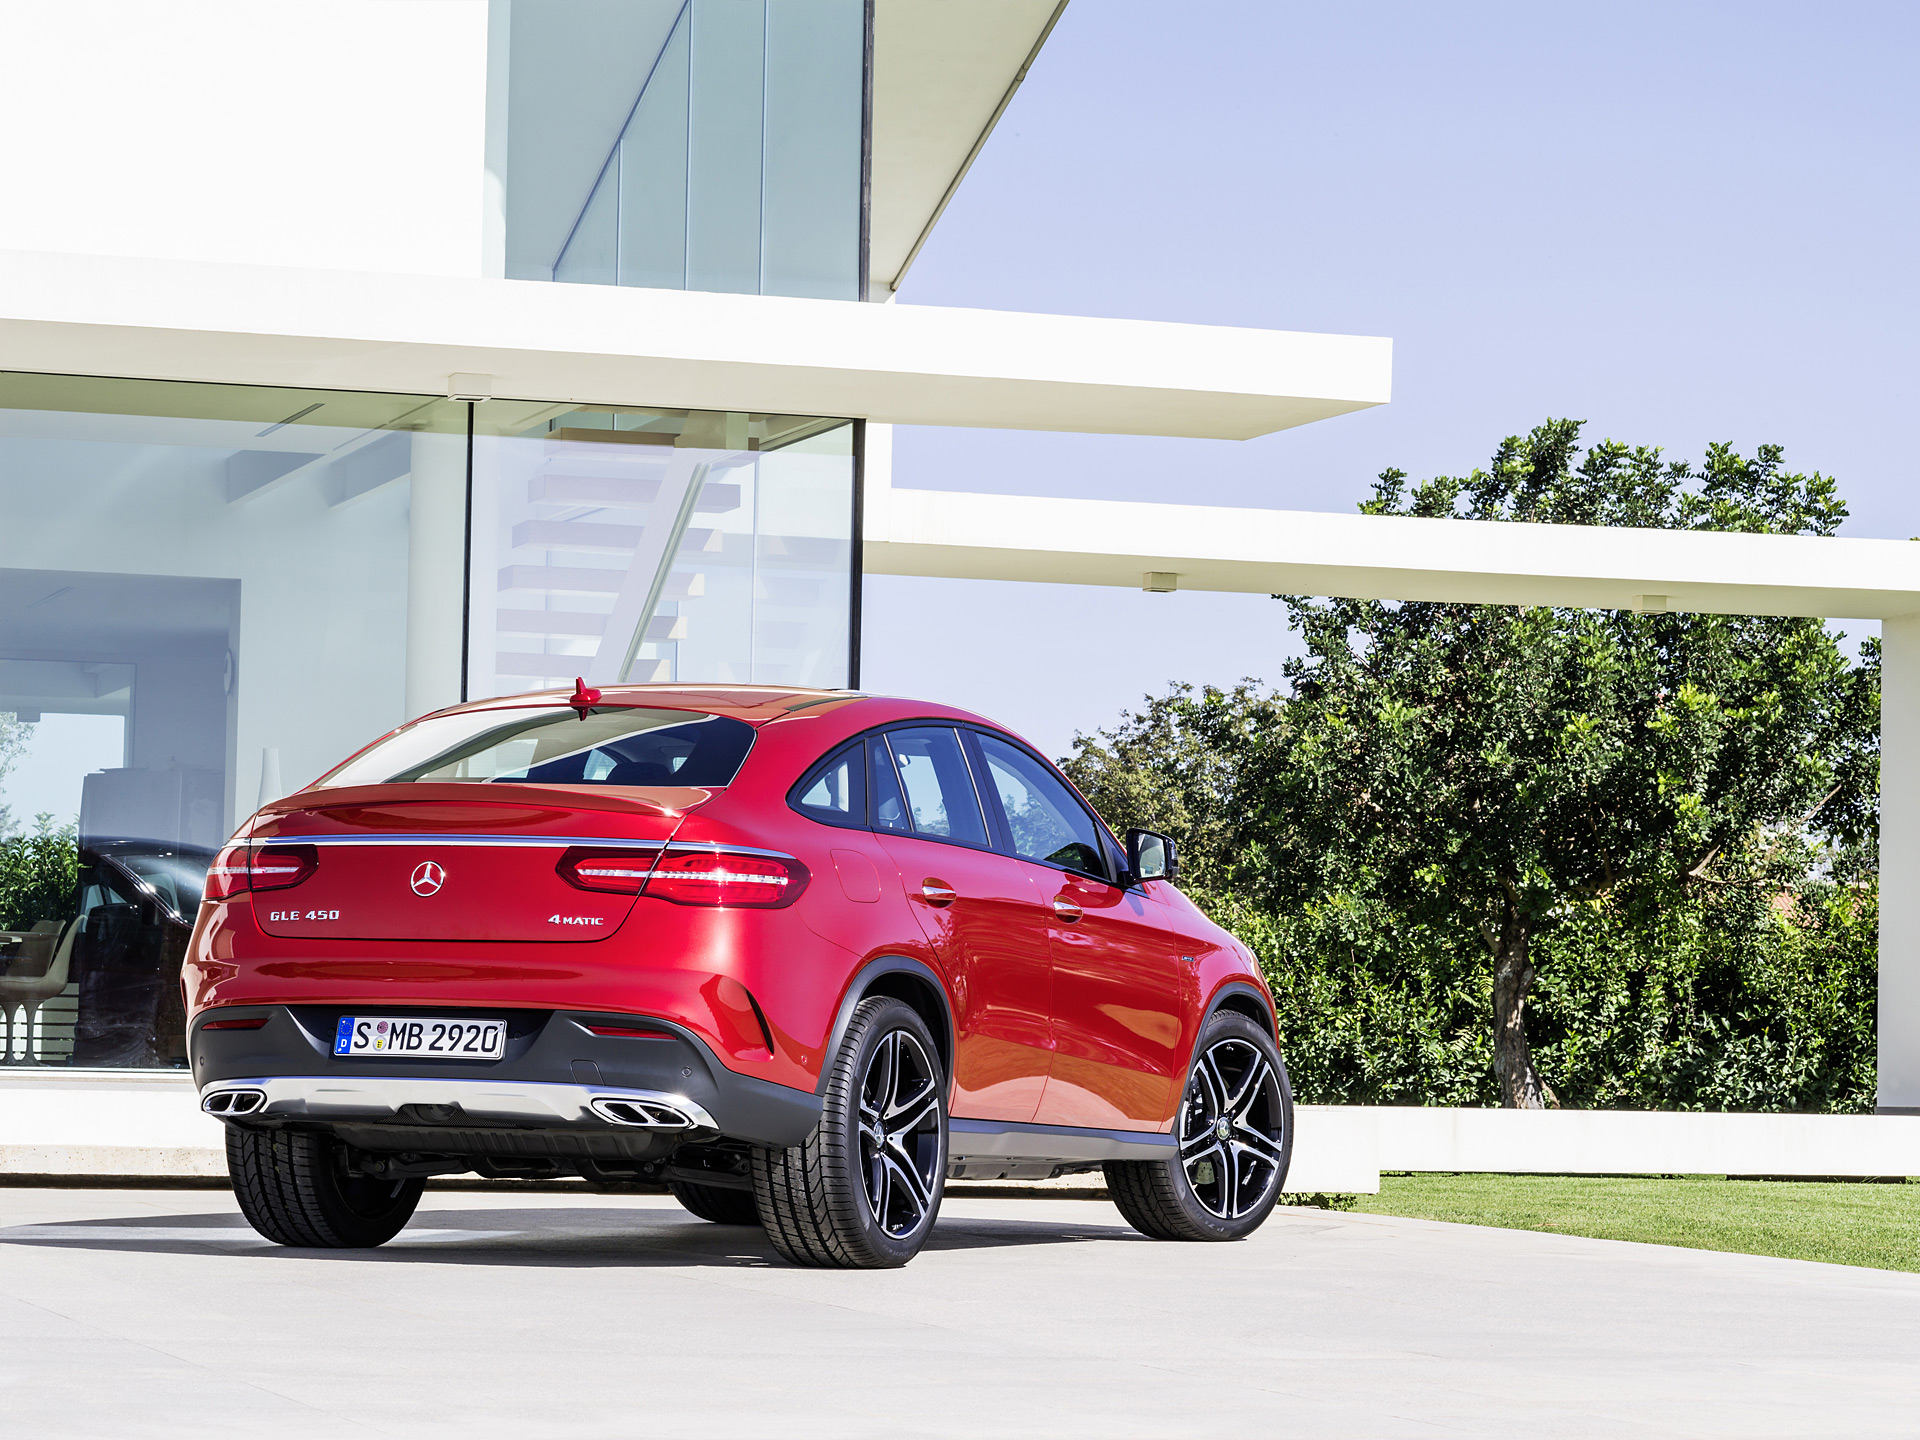  2016 Mercedes-Benz GLE450 AMG Coupe Wallpaper.